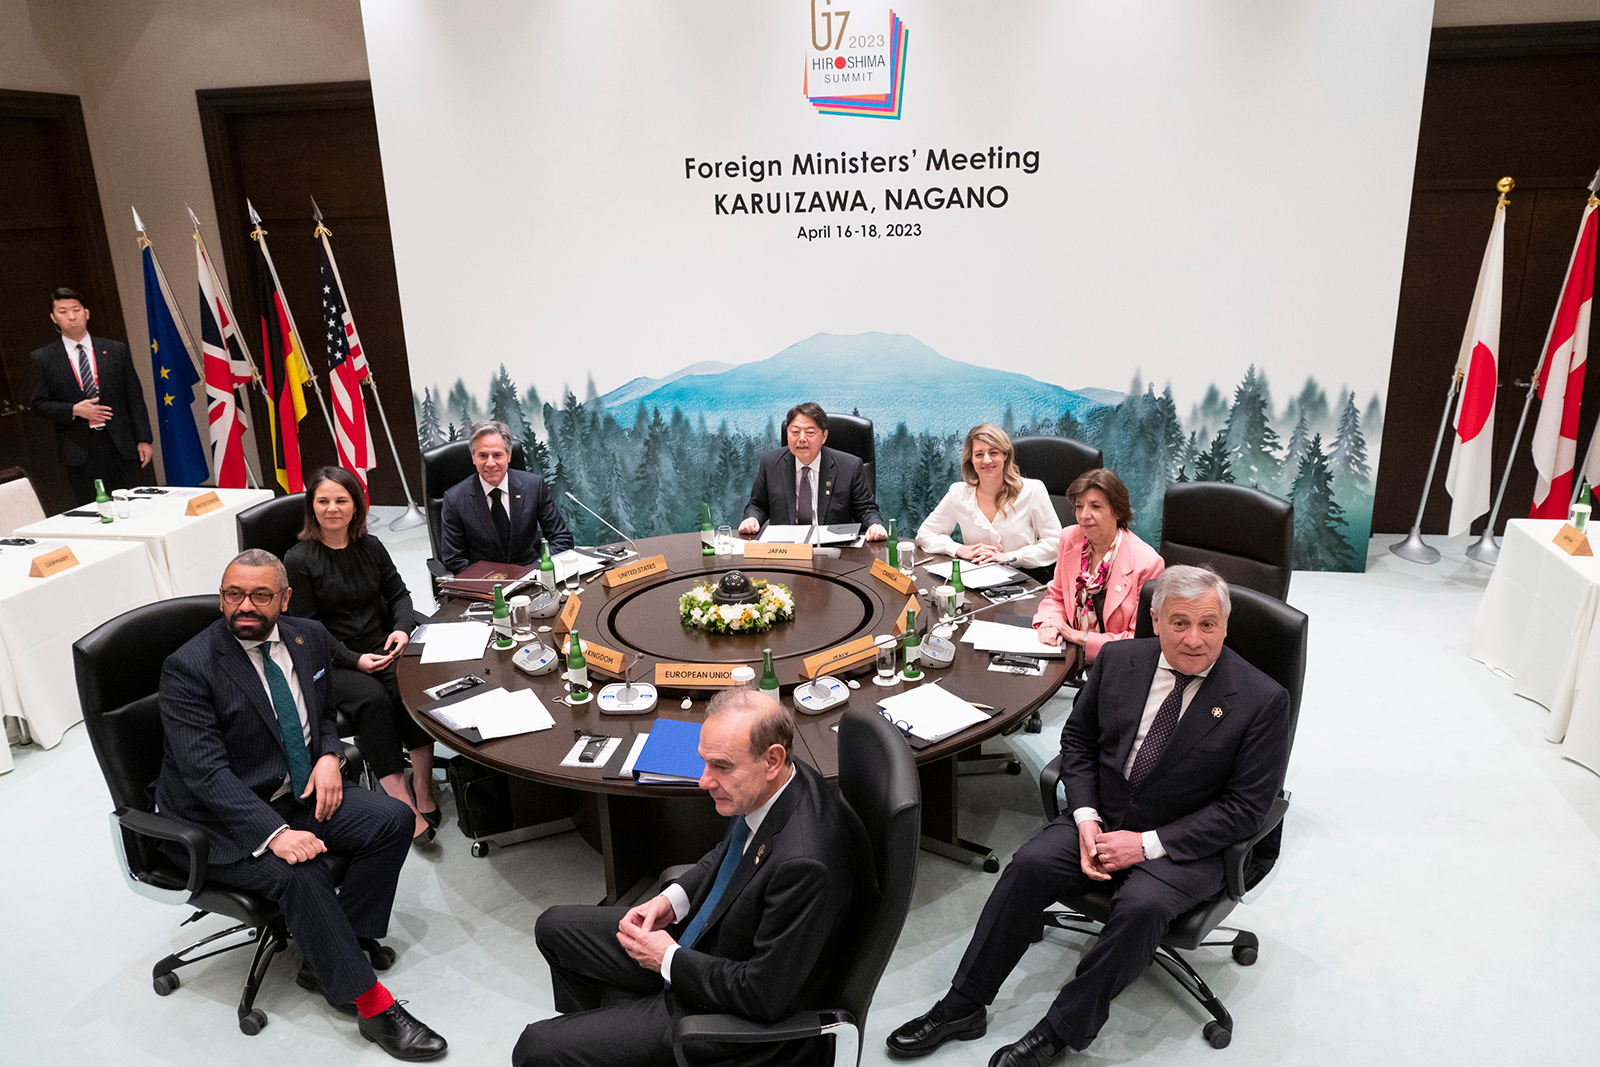 This picture shows the start of the fifth working session of a G7 Foreign Ministers' Meeting in Karuizawa, Japan on Tuesday, April 18.